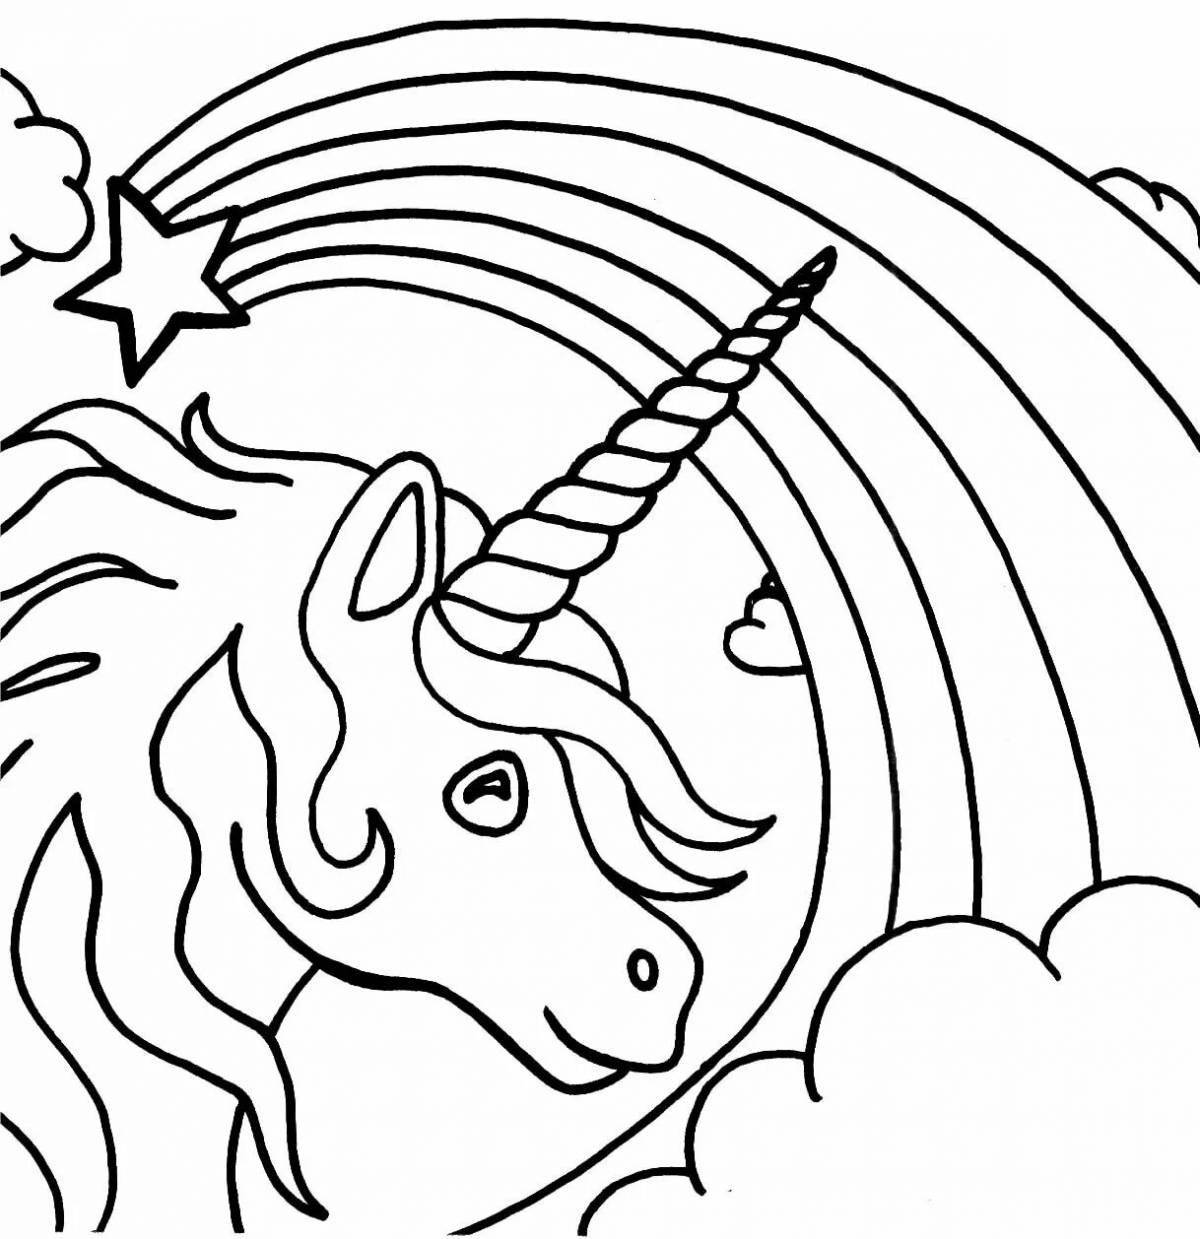 Great unicorn coloring book for kids